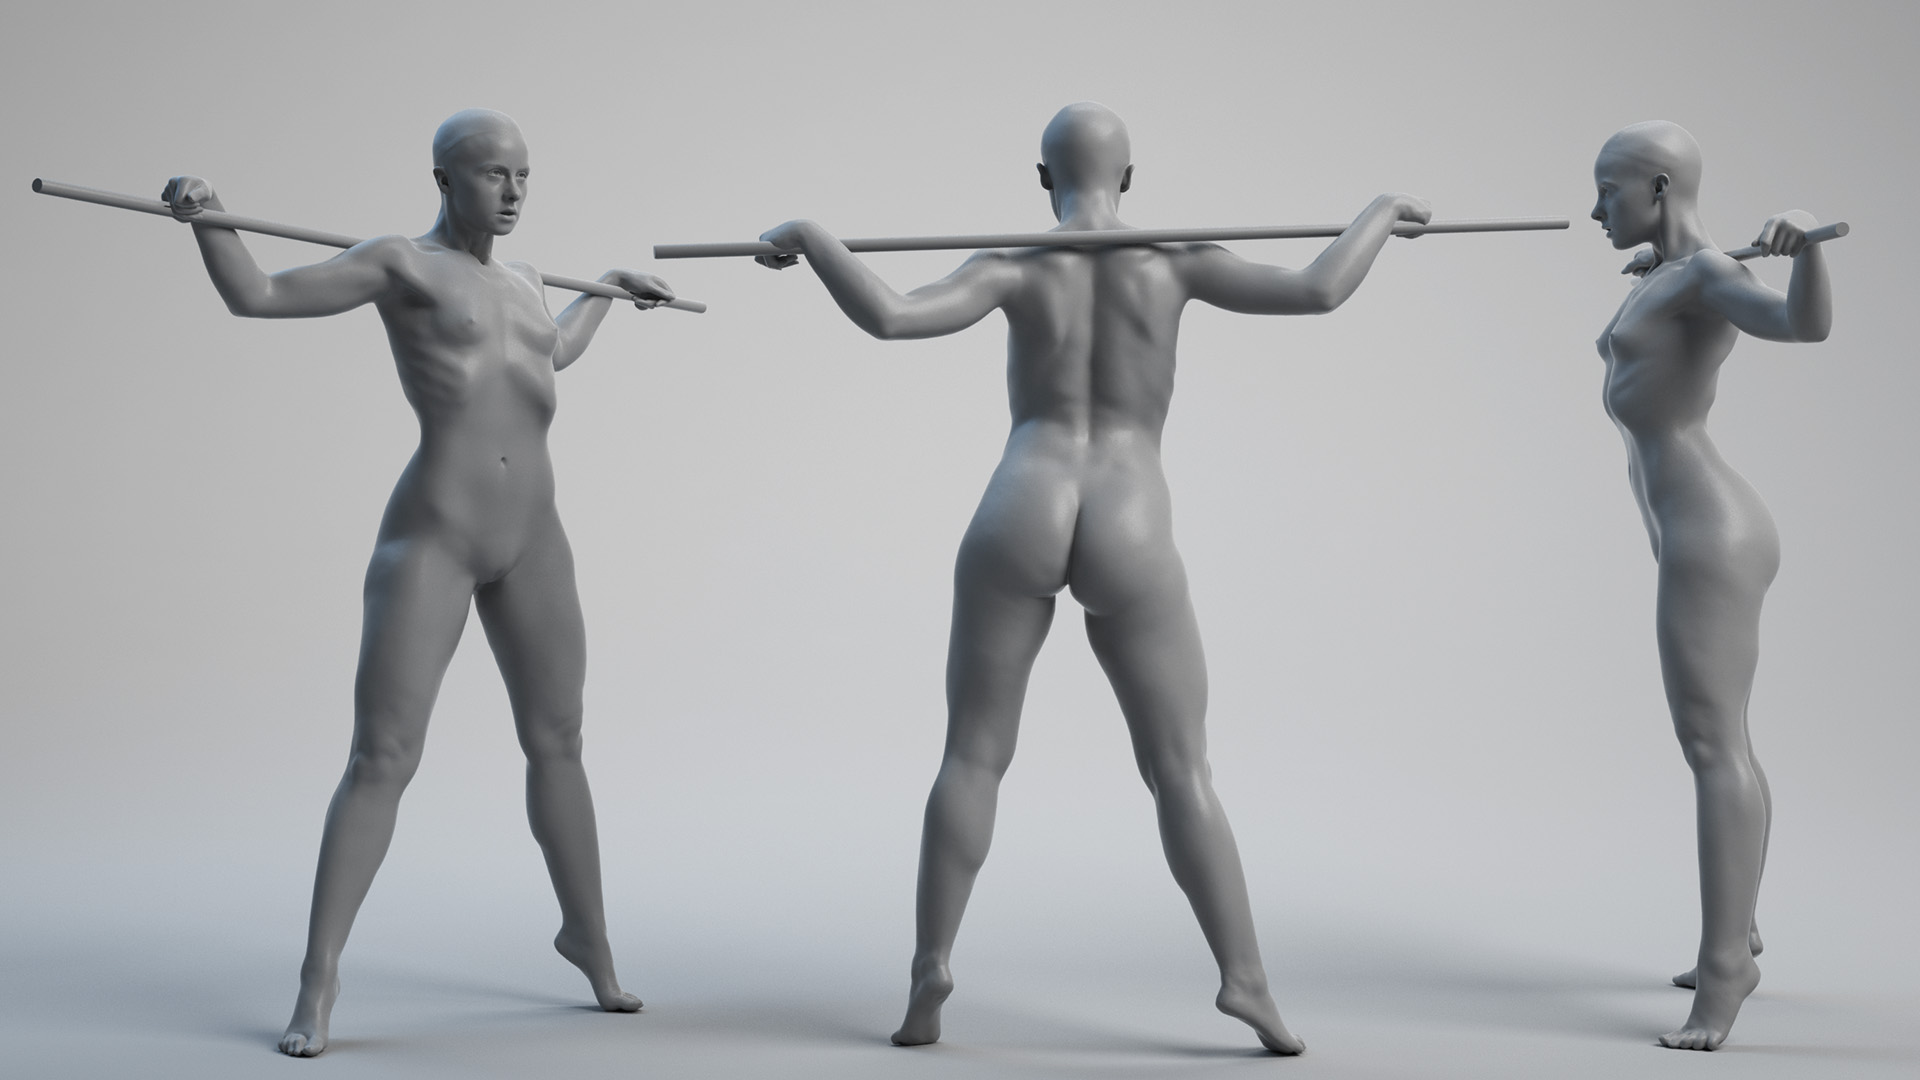 Female posing using pole on shoulders in 3D model for reference